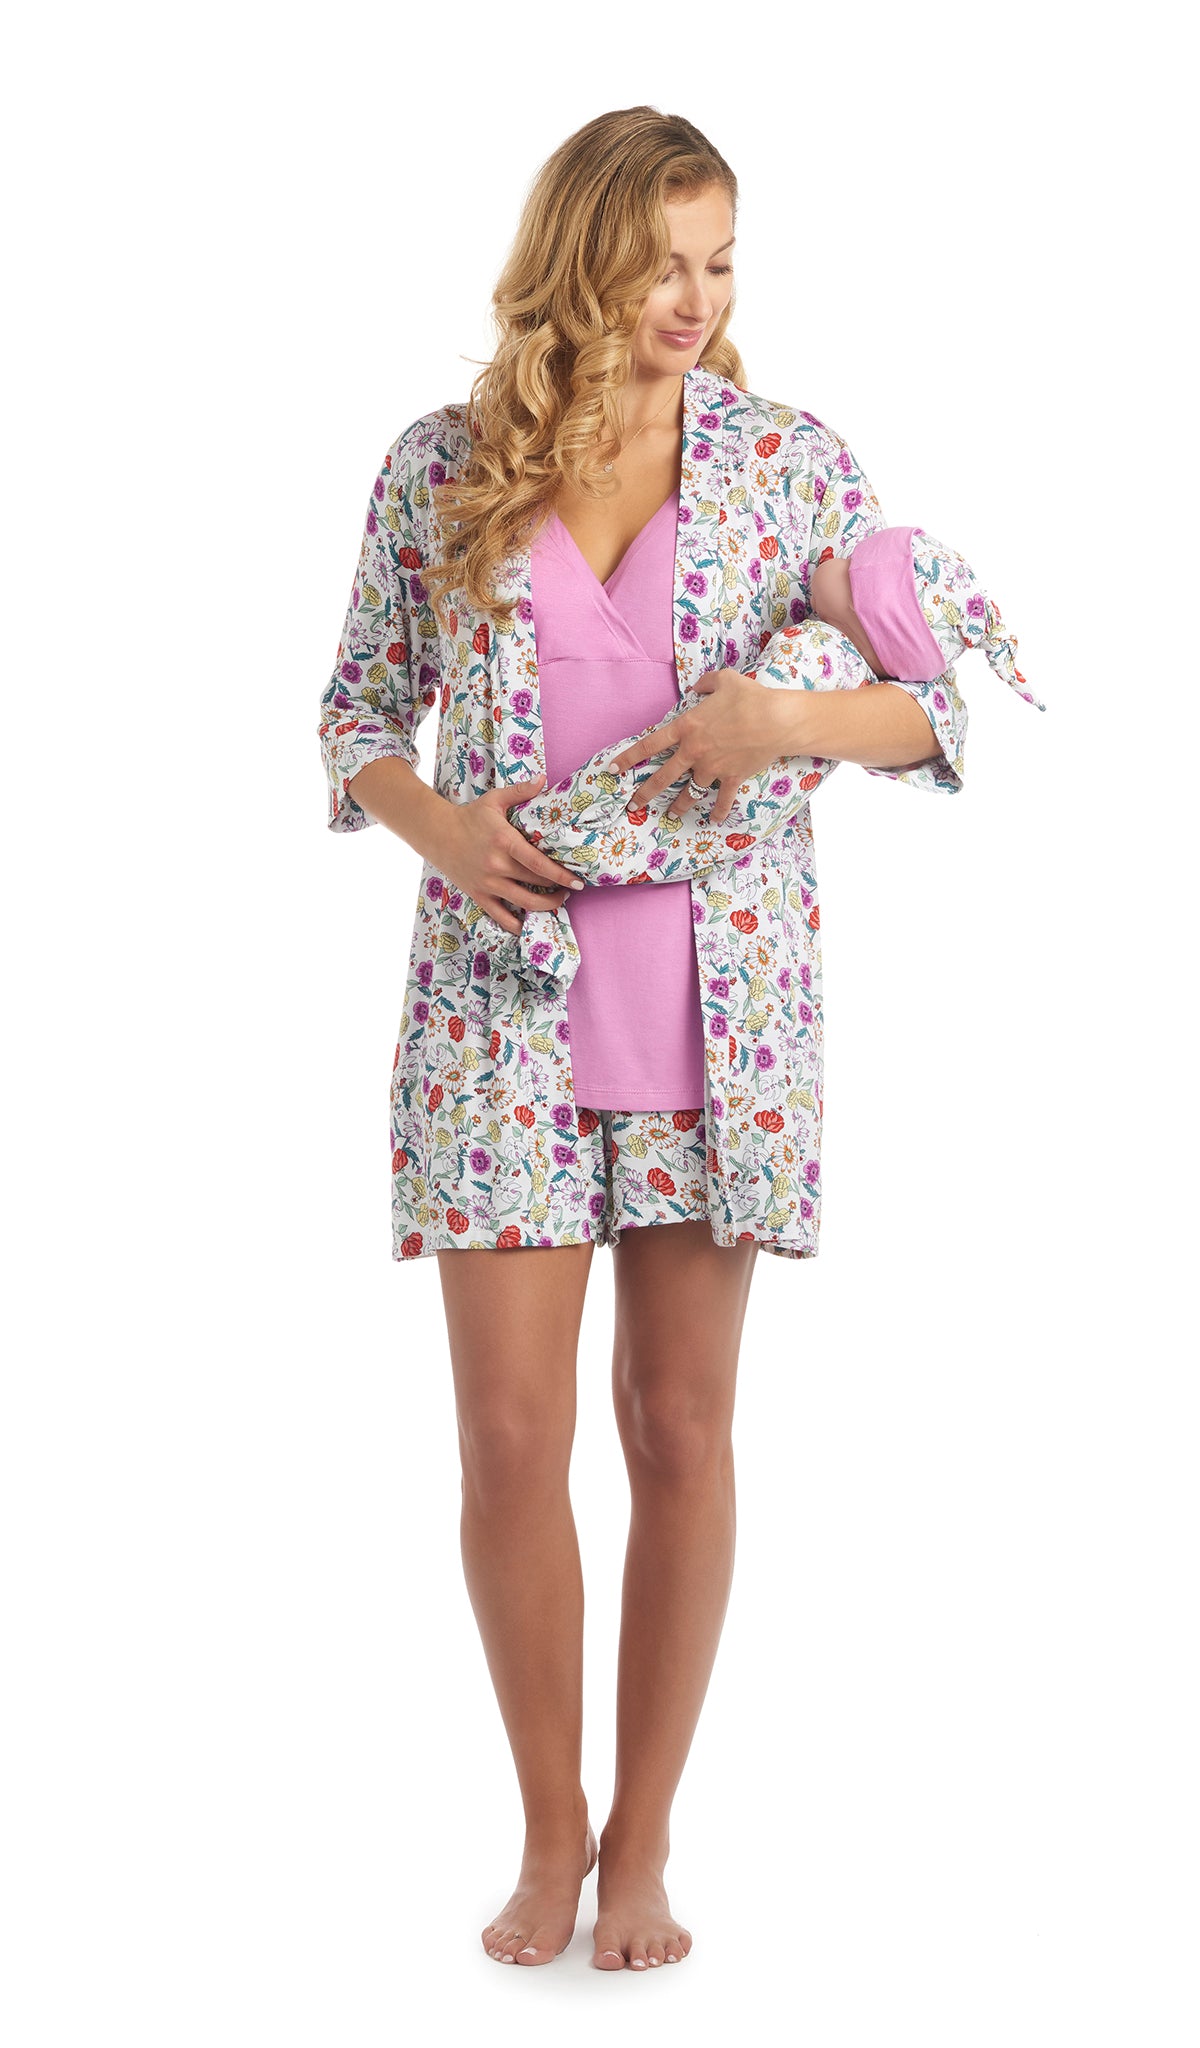 Zinnia Adaline 5-Piece Set. Woman wearing 3/4 sleeve robe, tank top and short while holding a baby wearing baby gown and knotted baby hat.